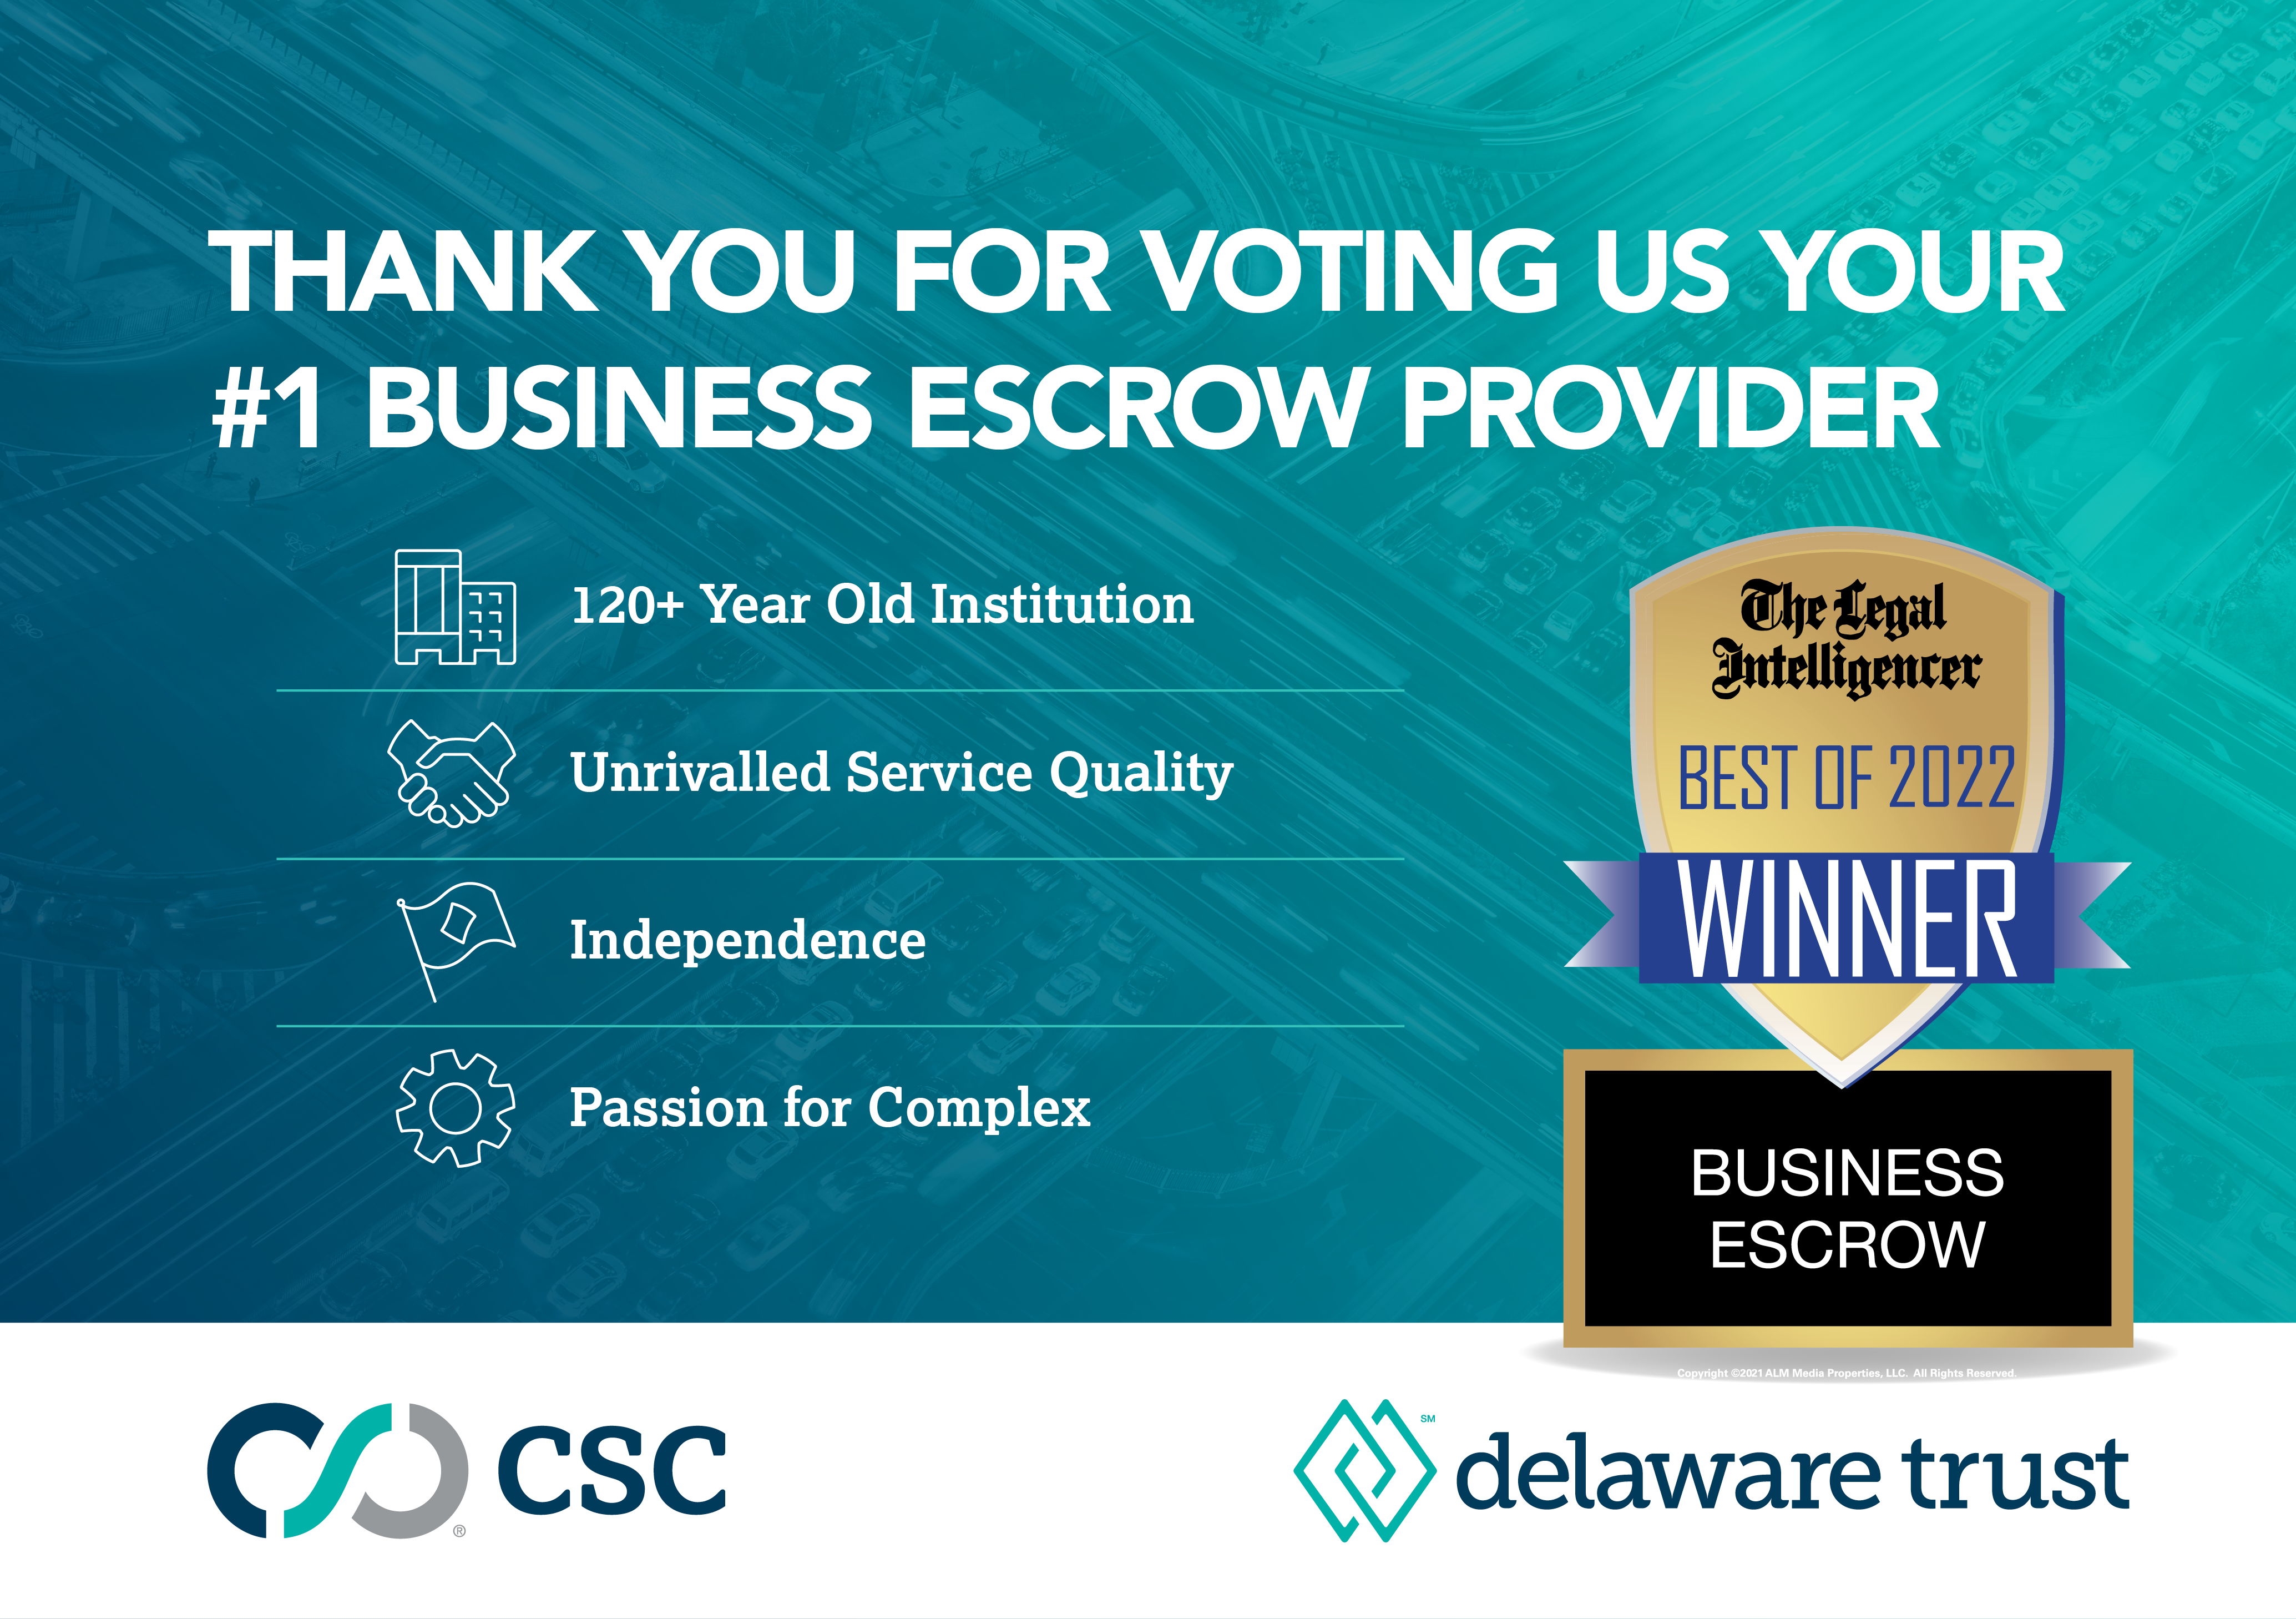 Thank you for voting us your #1 Business Escrow Provider